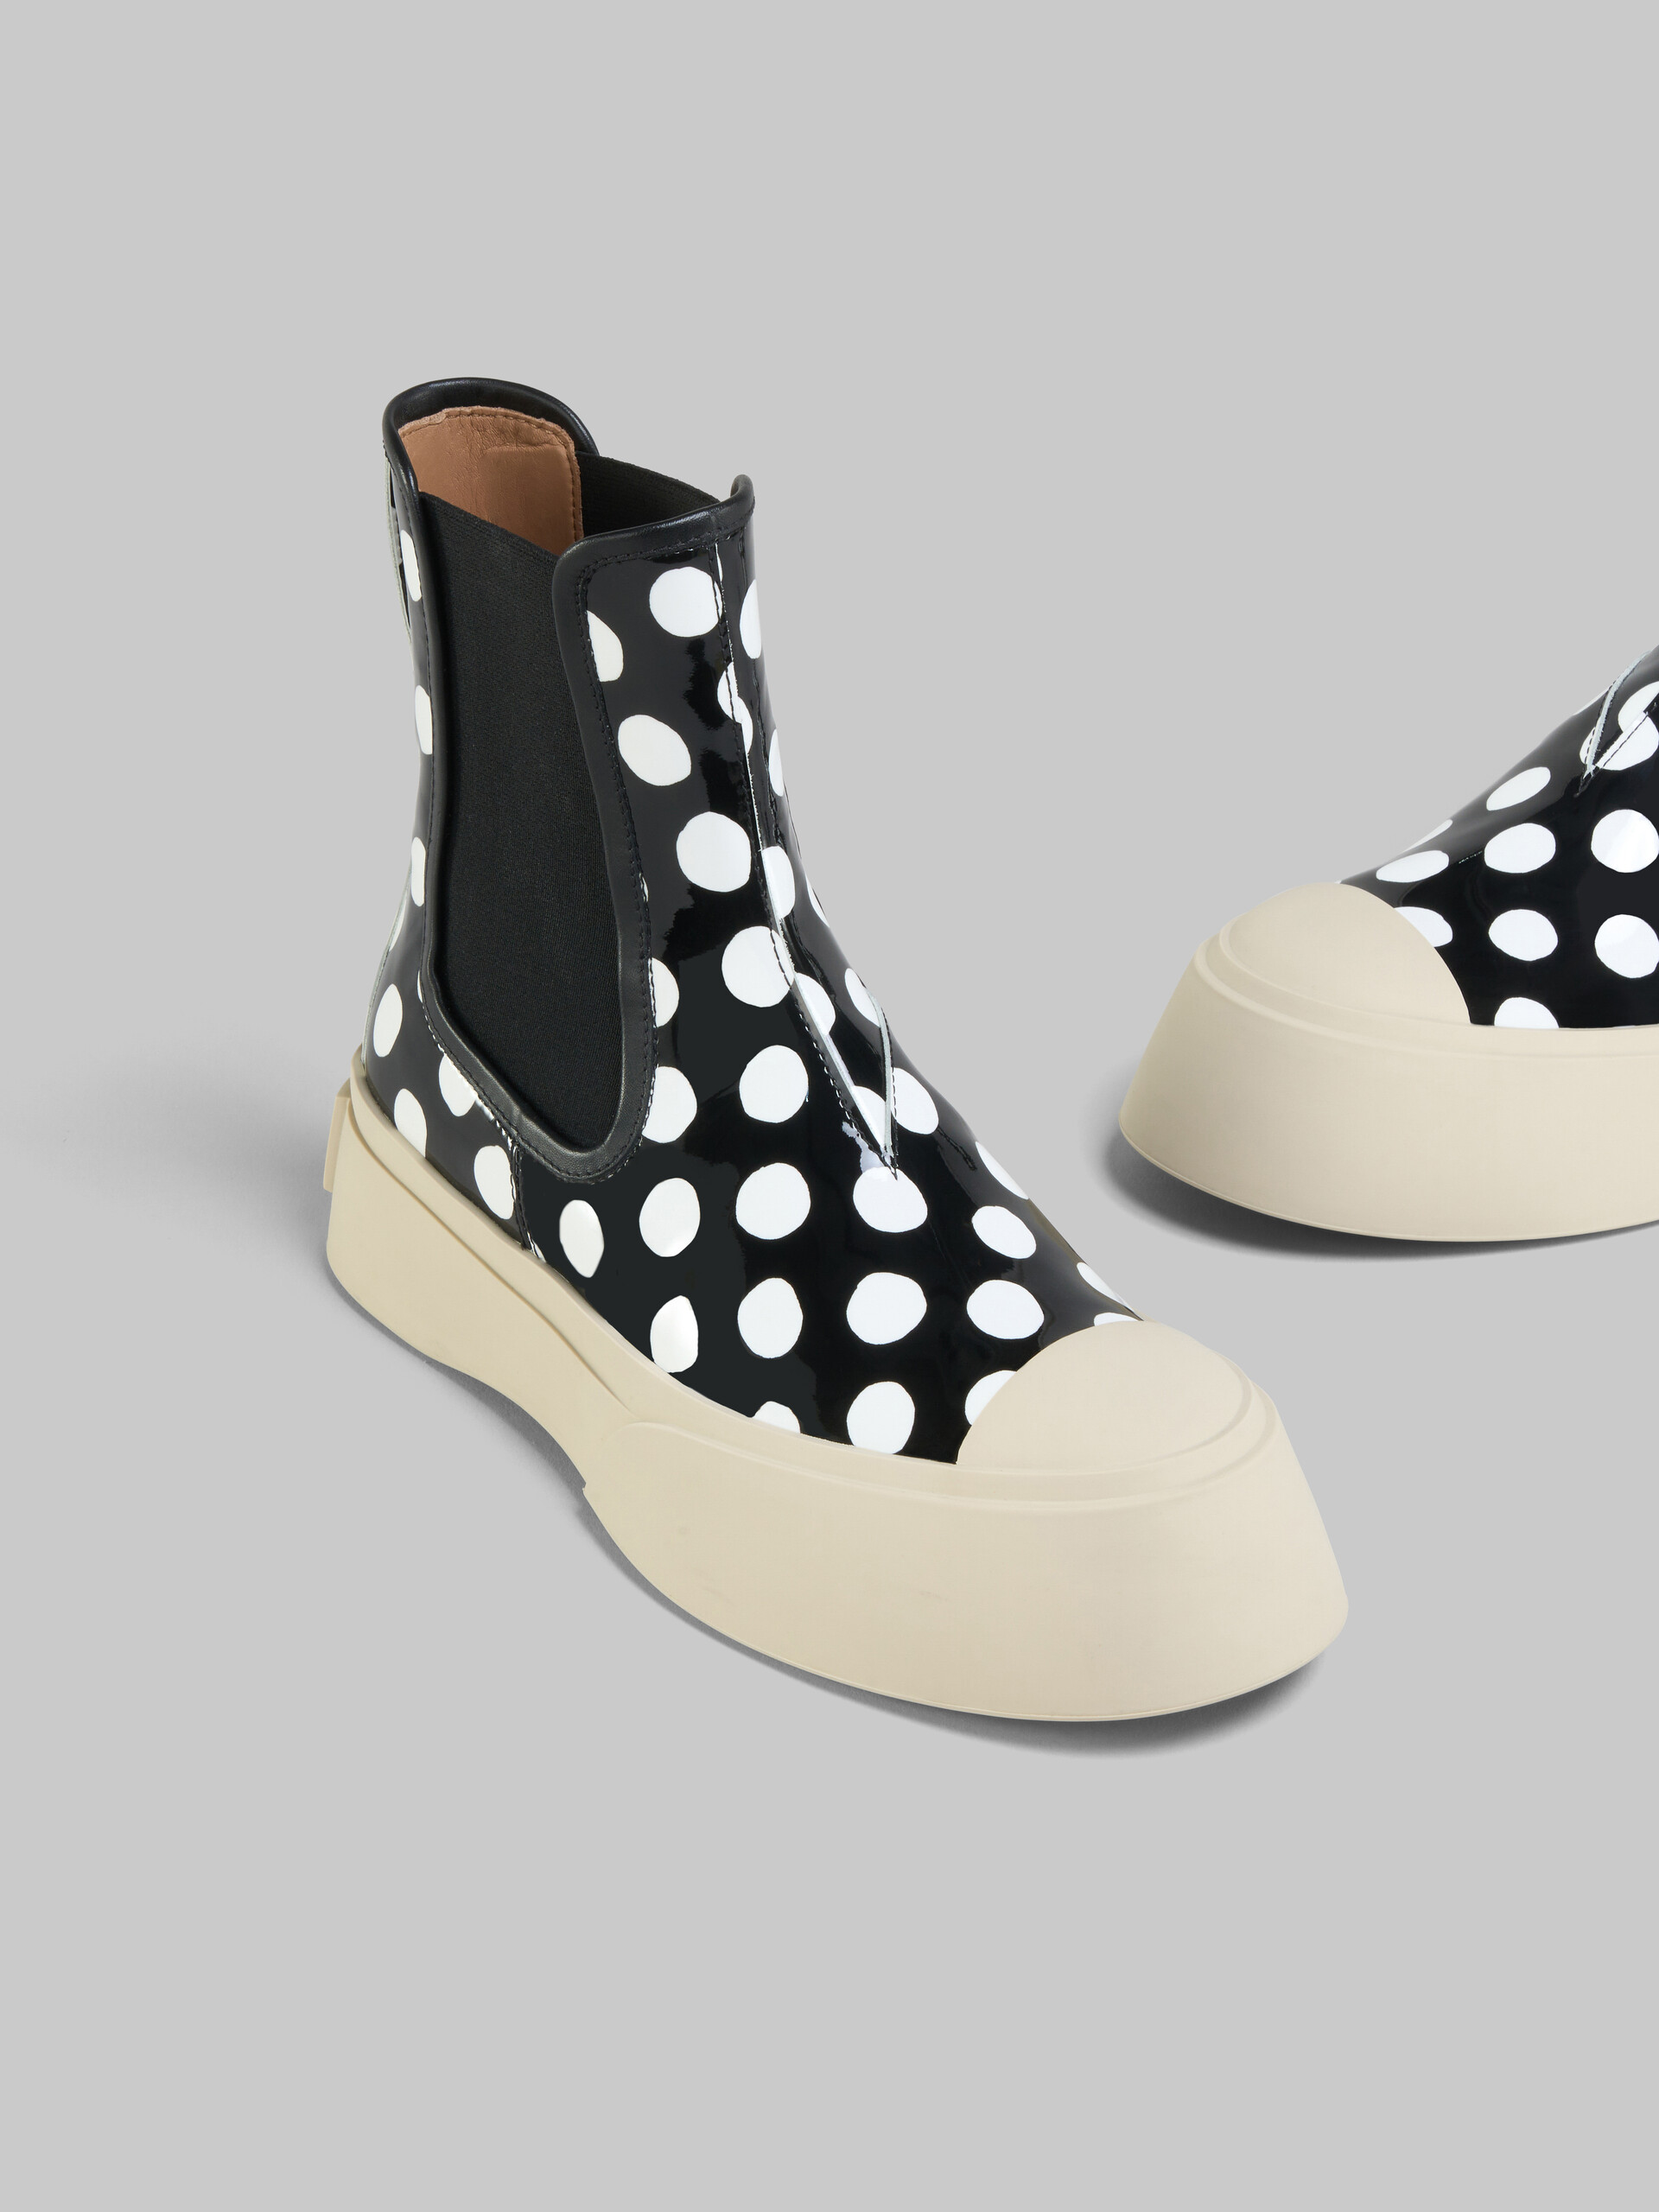 Black and white polka-dot patent leather Pablo Chelsea boot - Boots - Image 4